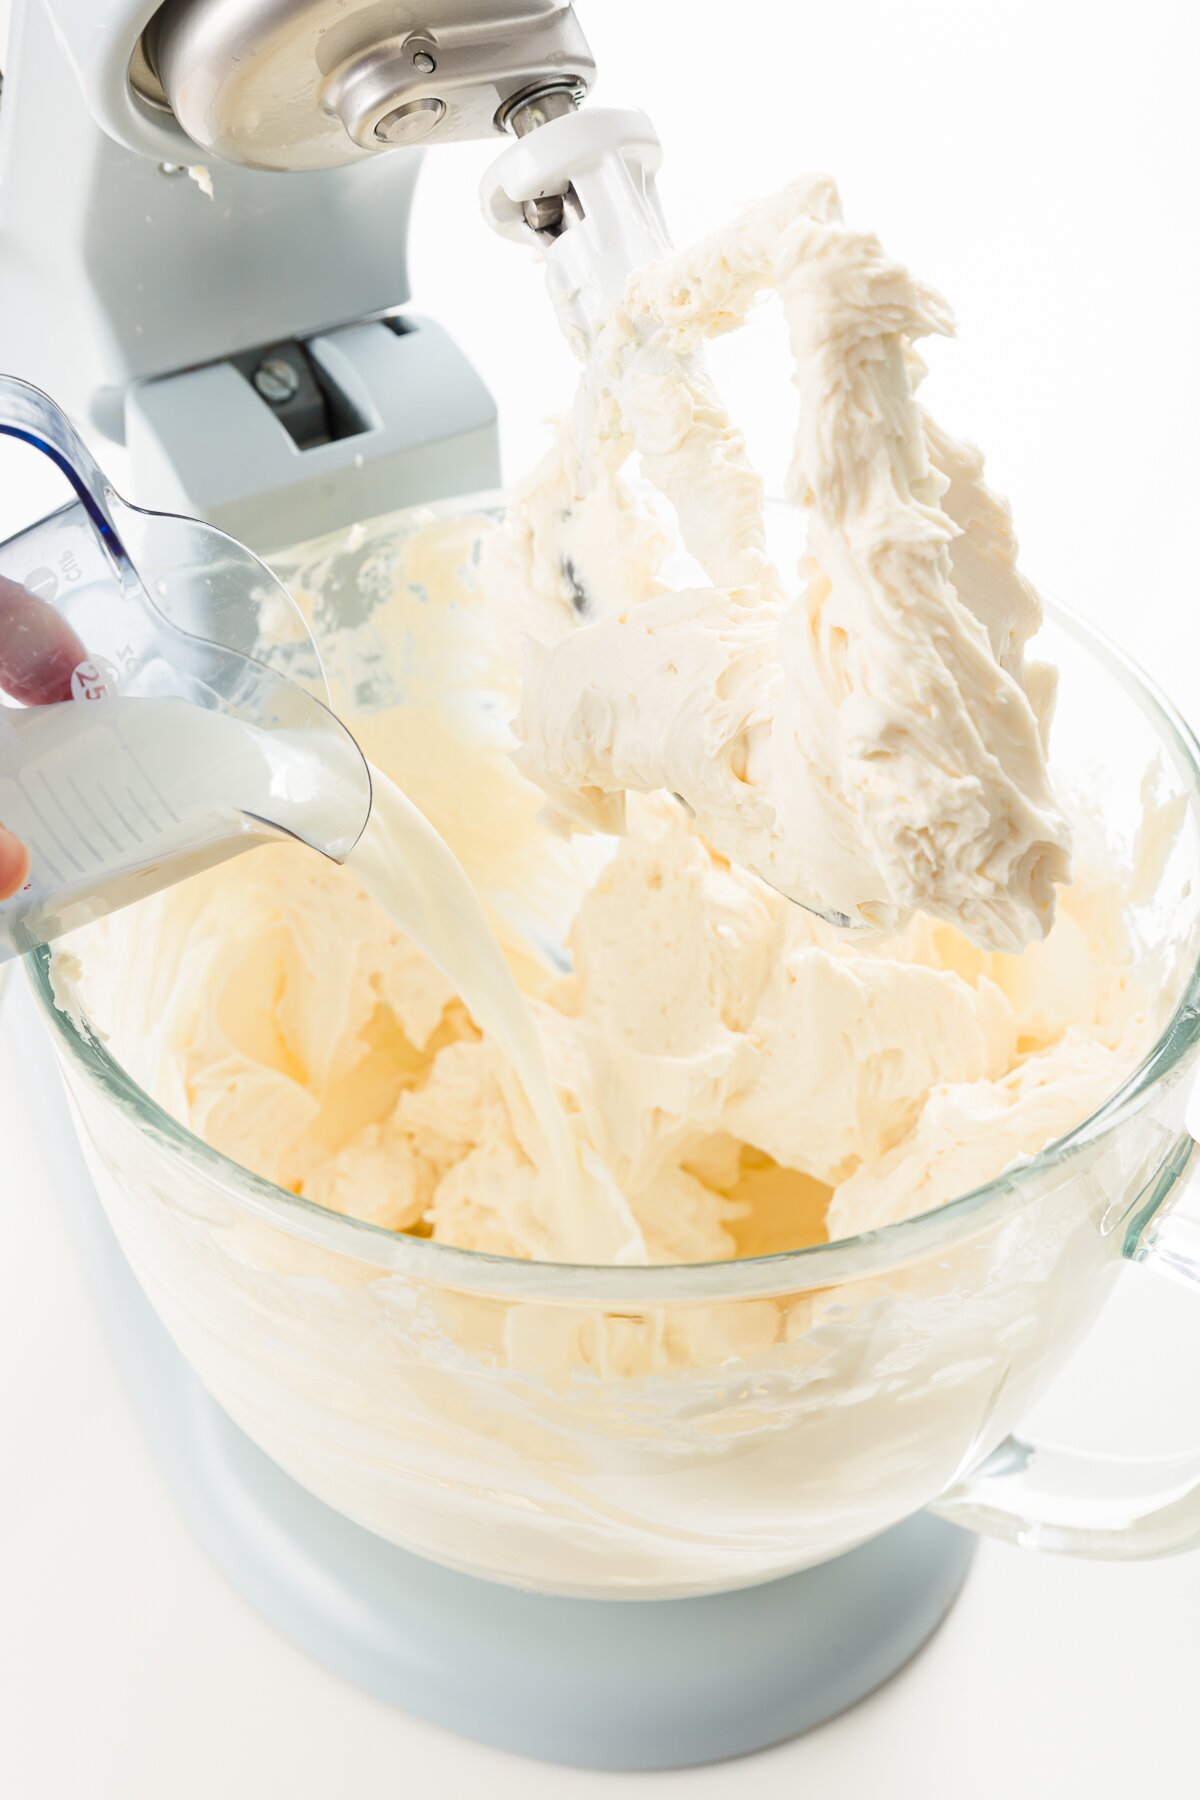 Adding milk to mixer bowl of a stand mixer with lifted paddle full of cream cheese and sugar mixture